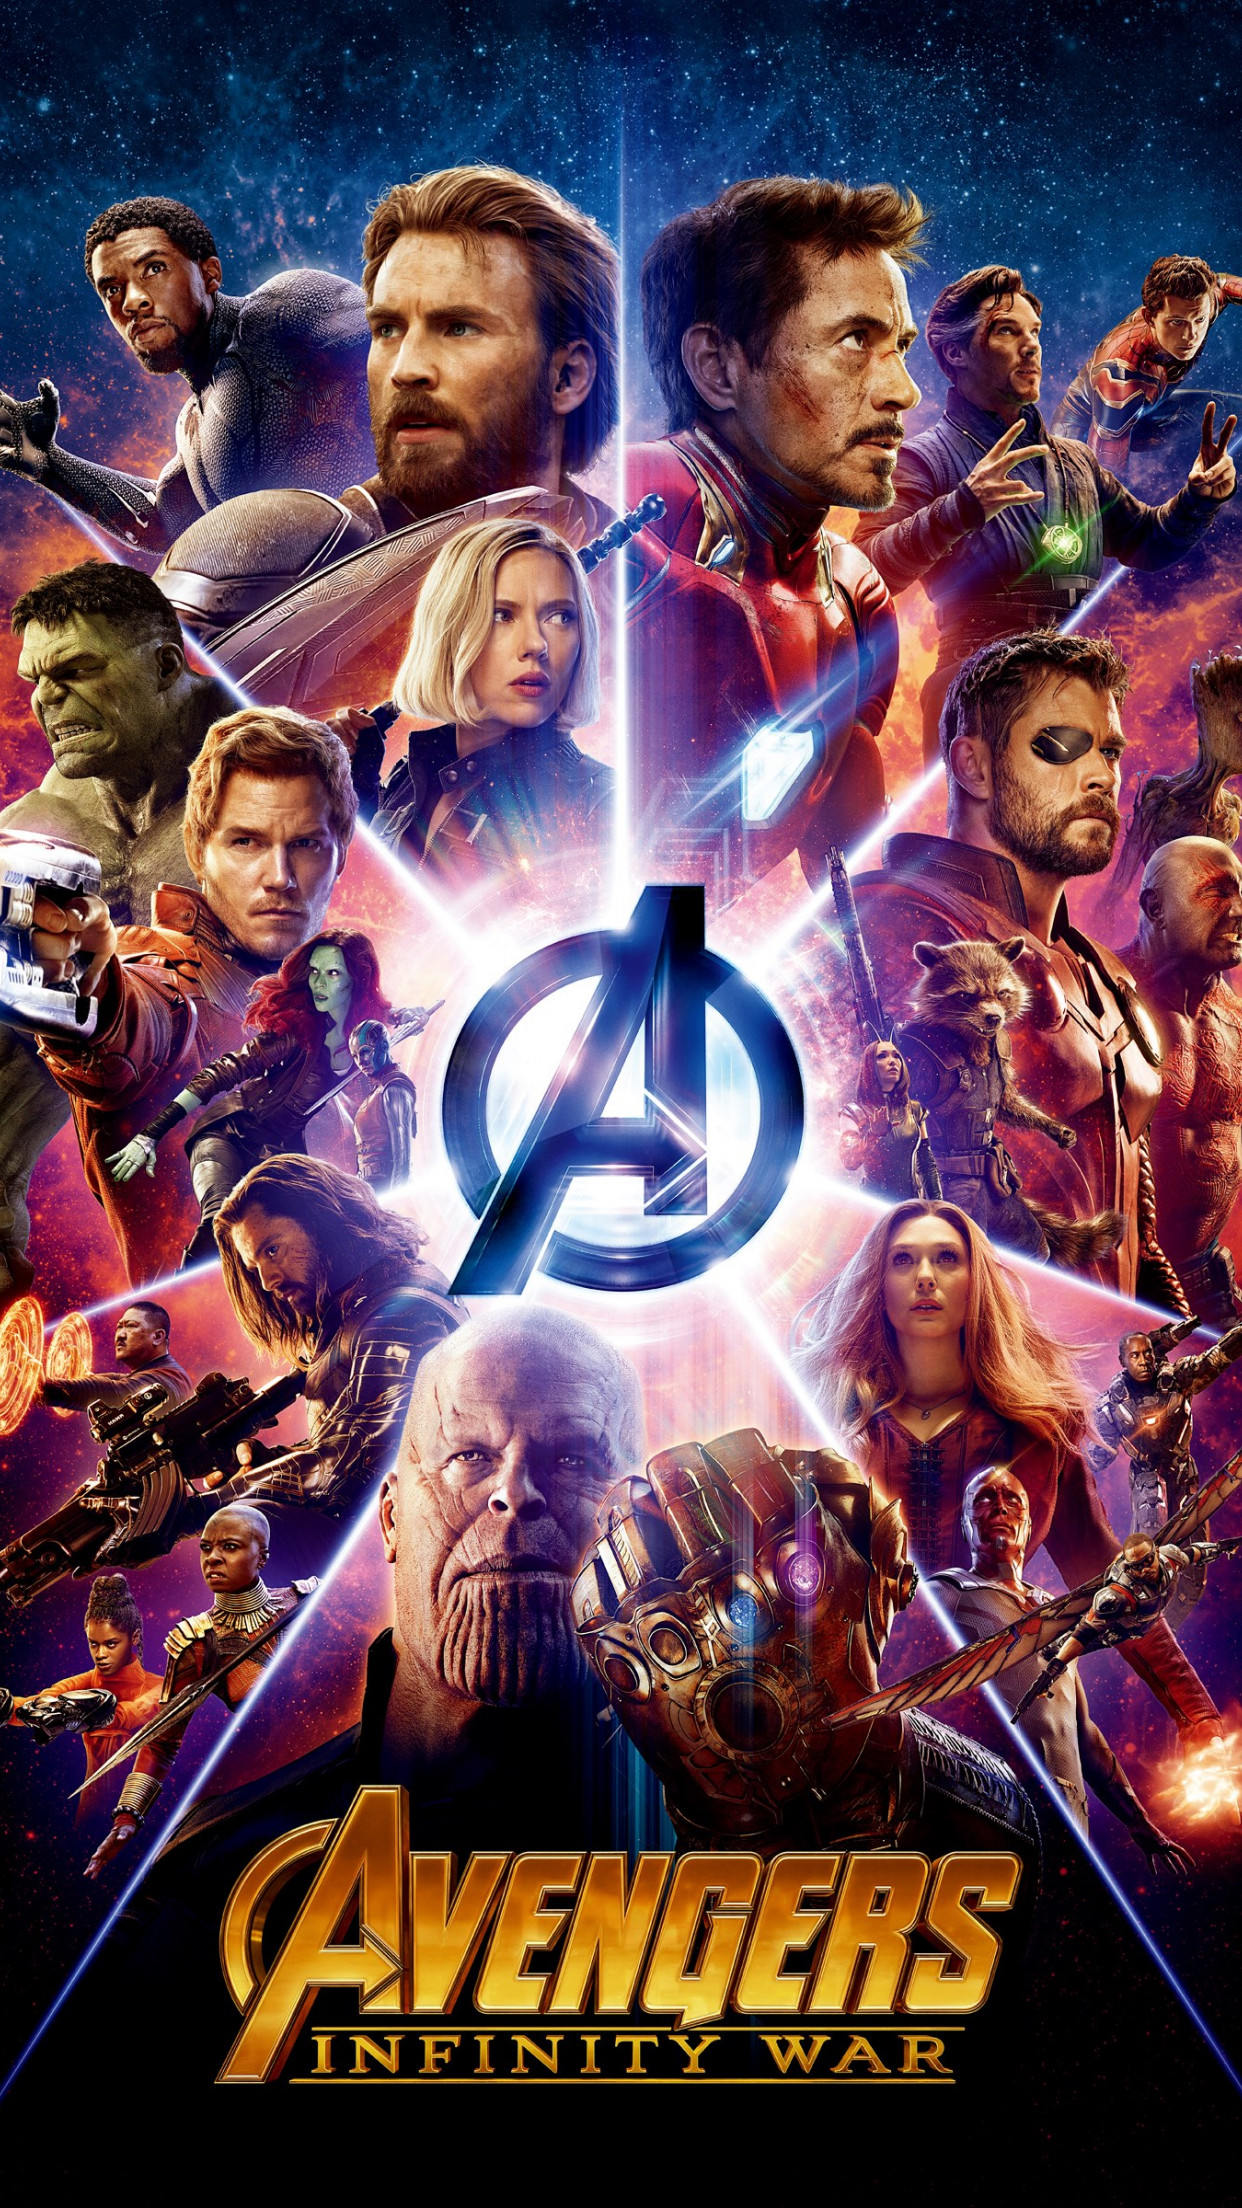 All the heroes from Avengers: Infinity War wallpaper 1242x2208